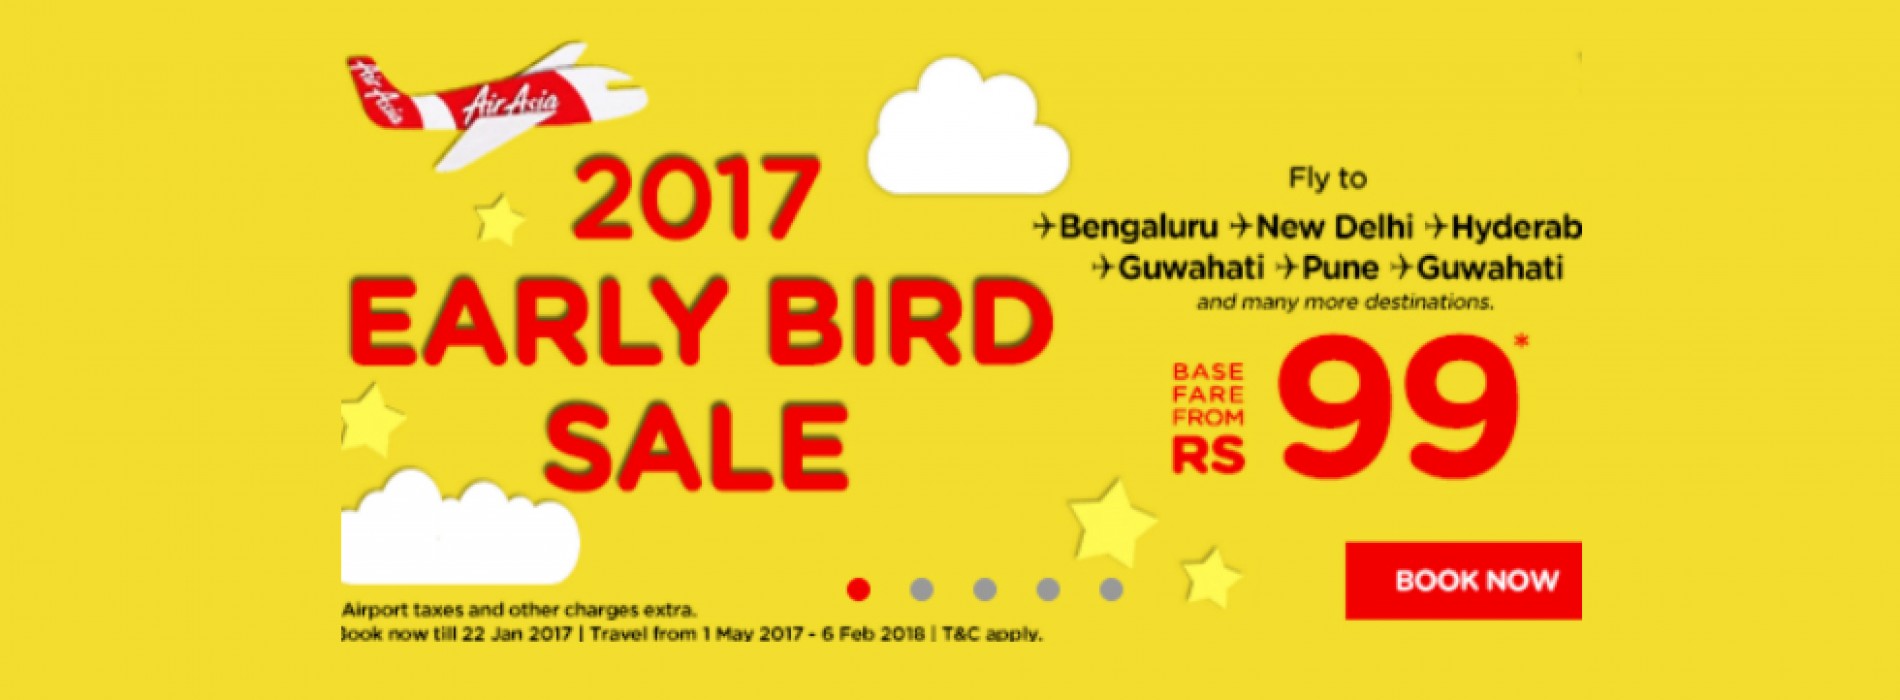 AirAsia launches Early Bird Sale with tickets starting at Rs 99